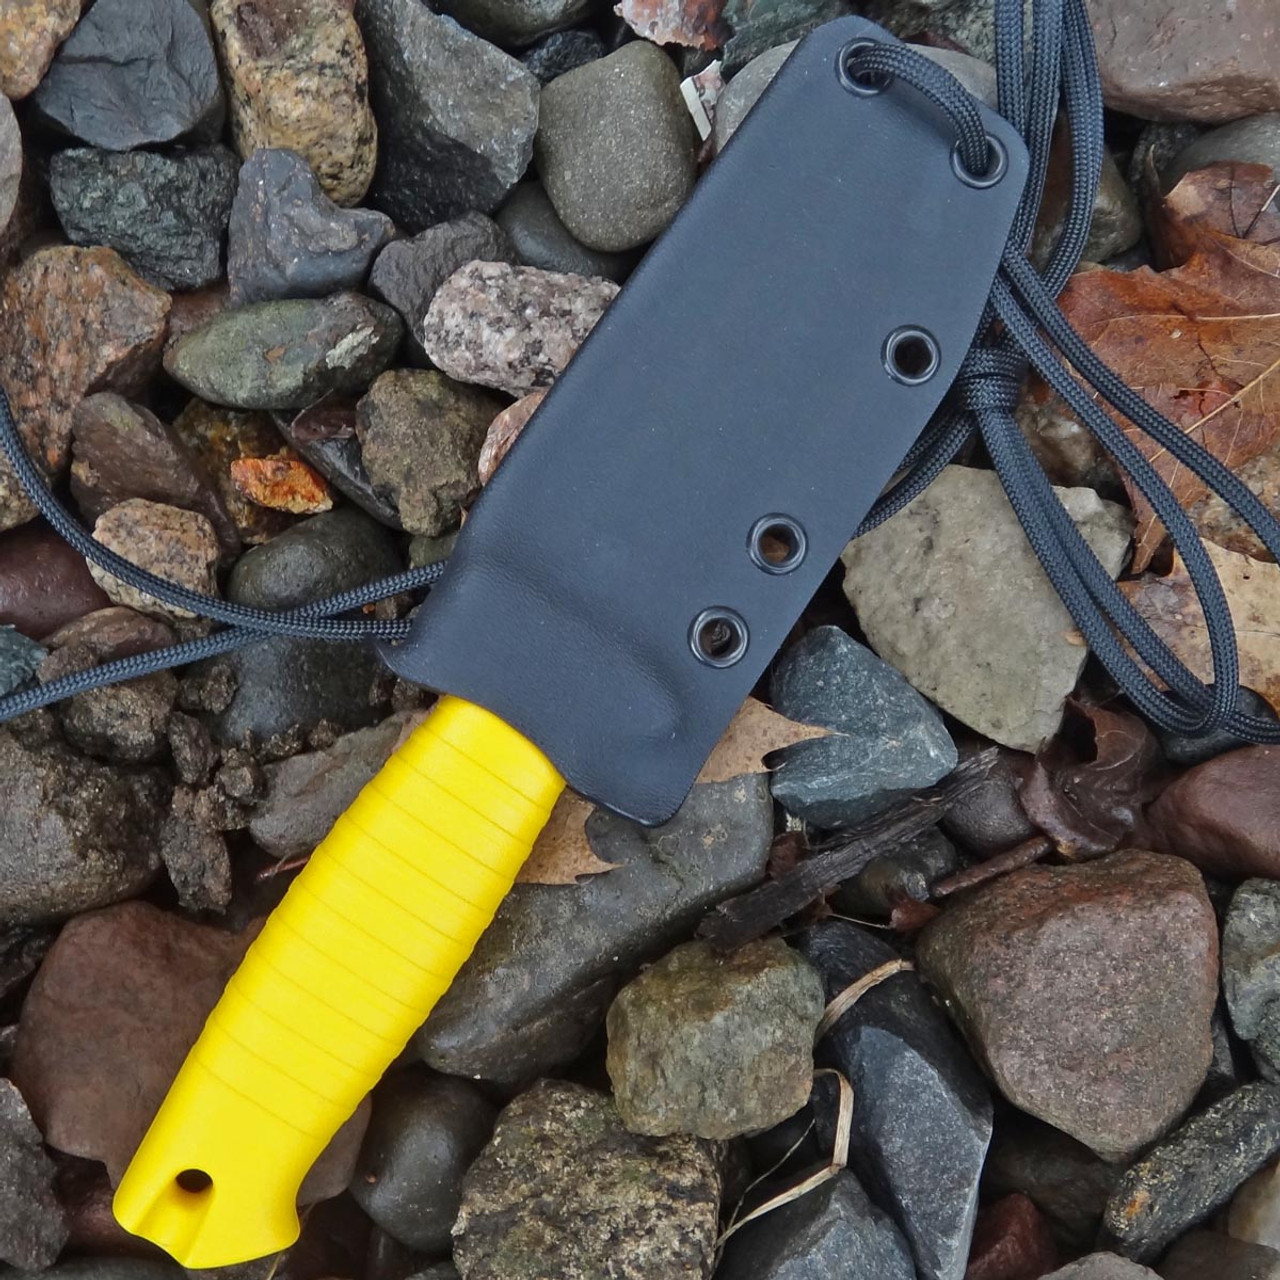 Kydex Knife Sheaths up to 11in Blade Length